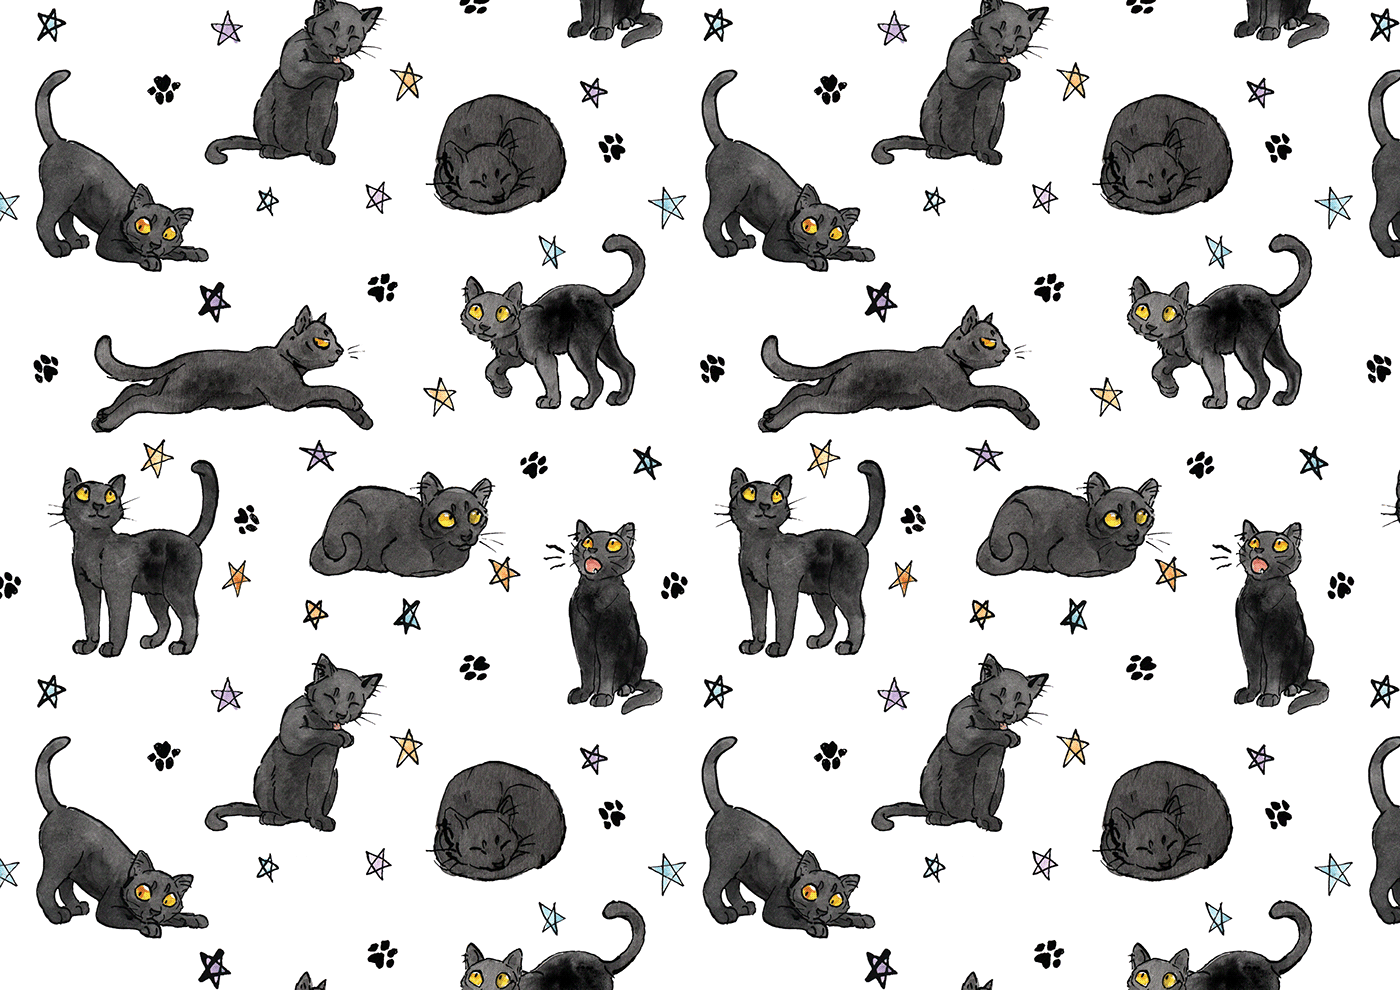 animals cats chickens dogs fabric design ILLUSTRATION  pattern illustration repeating pattern surface design surface illustration